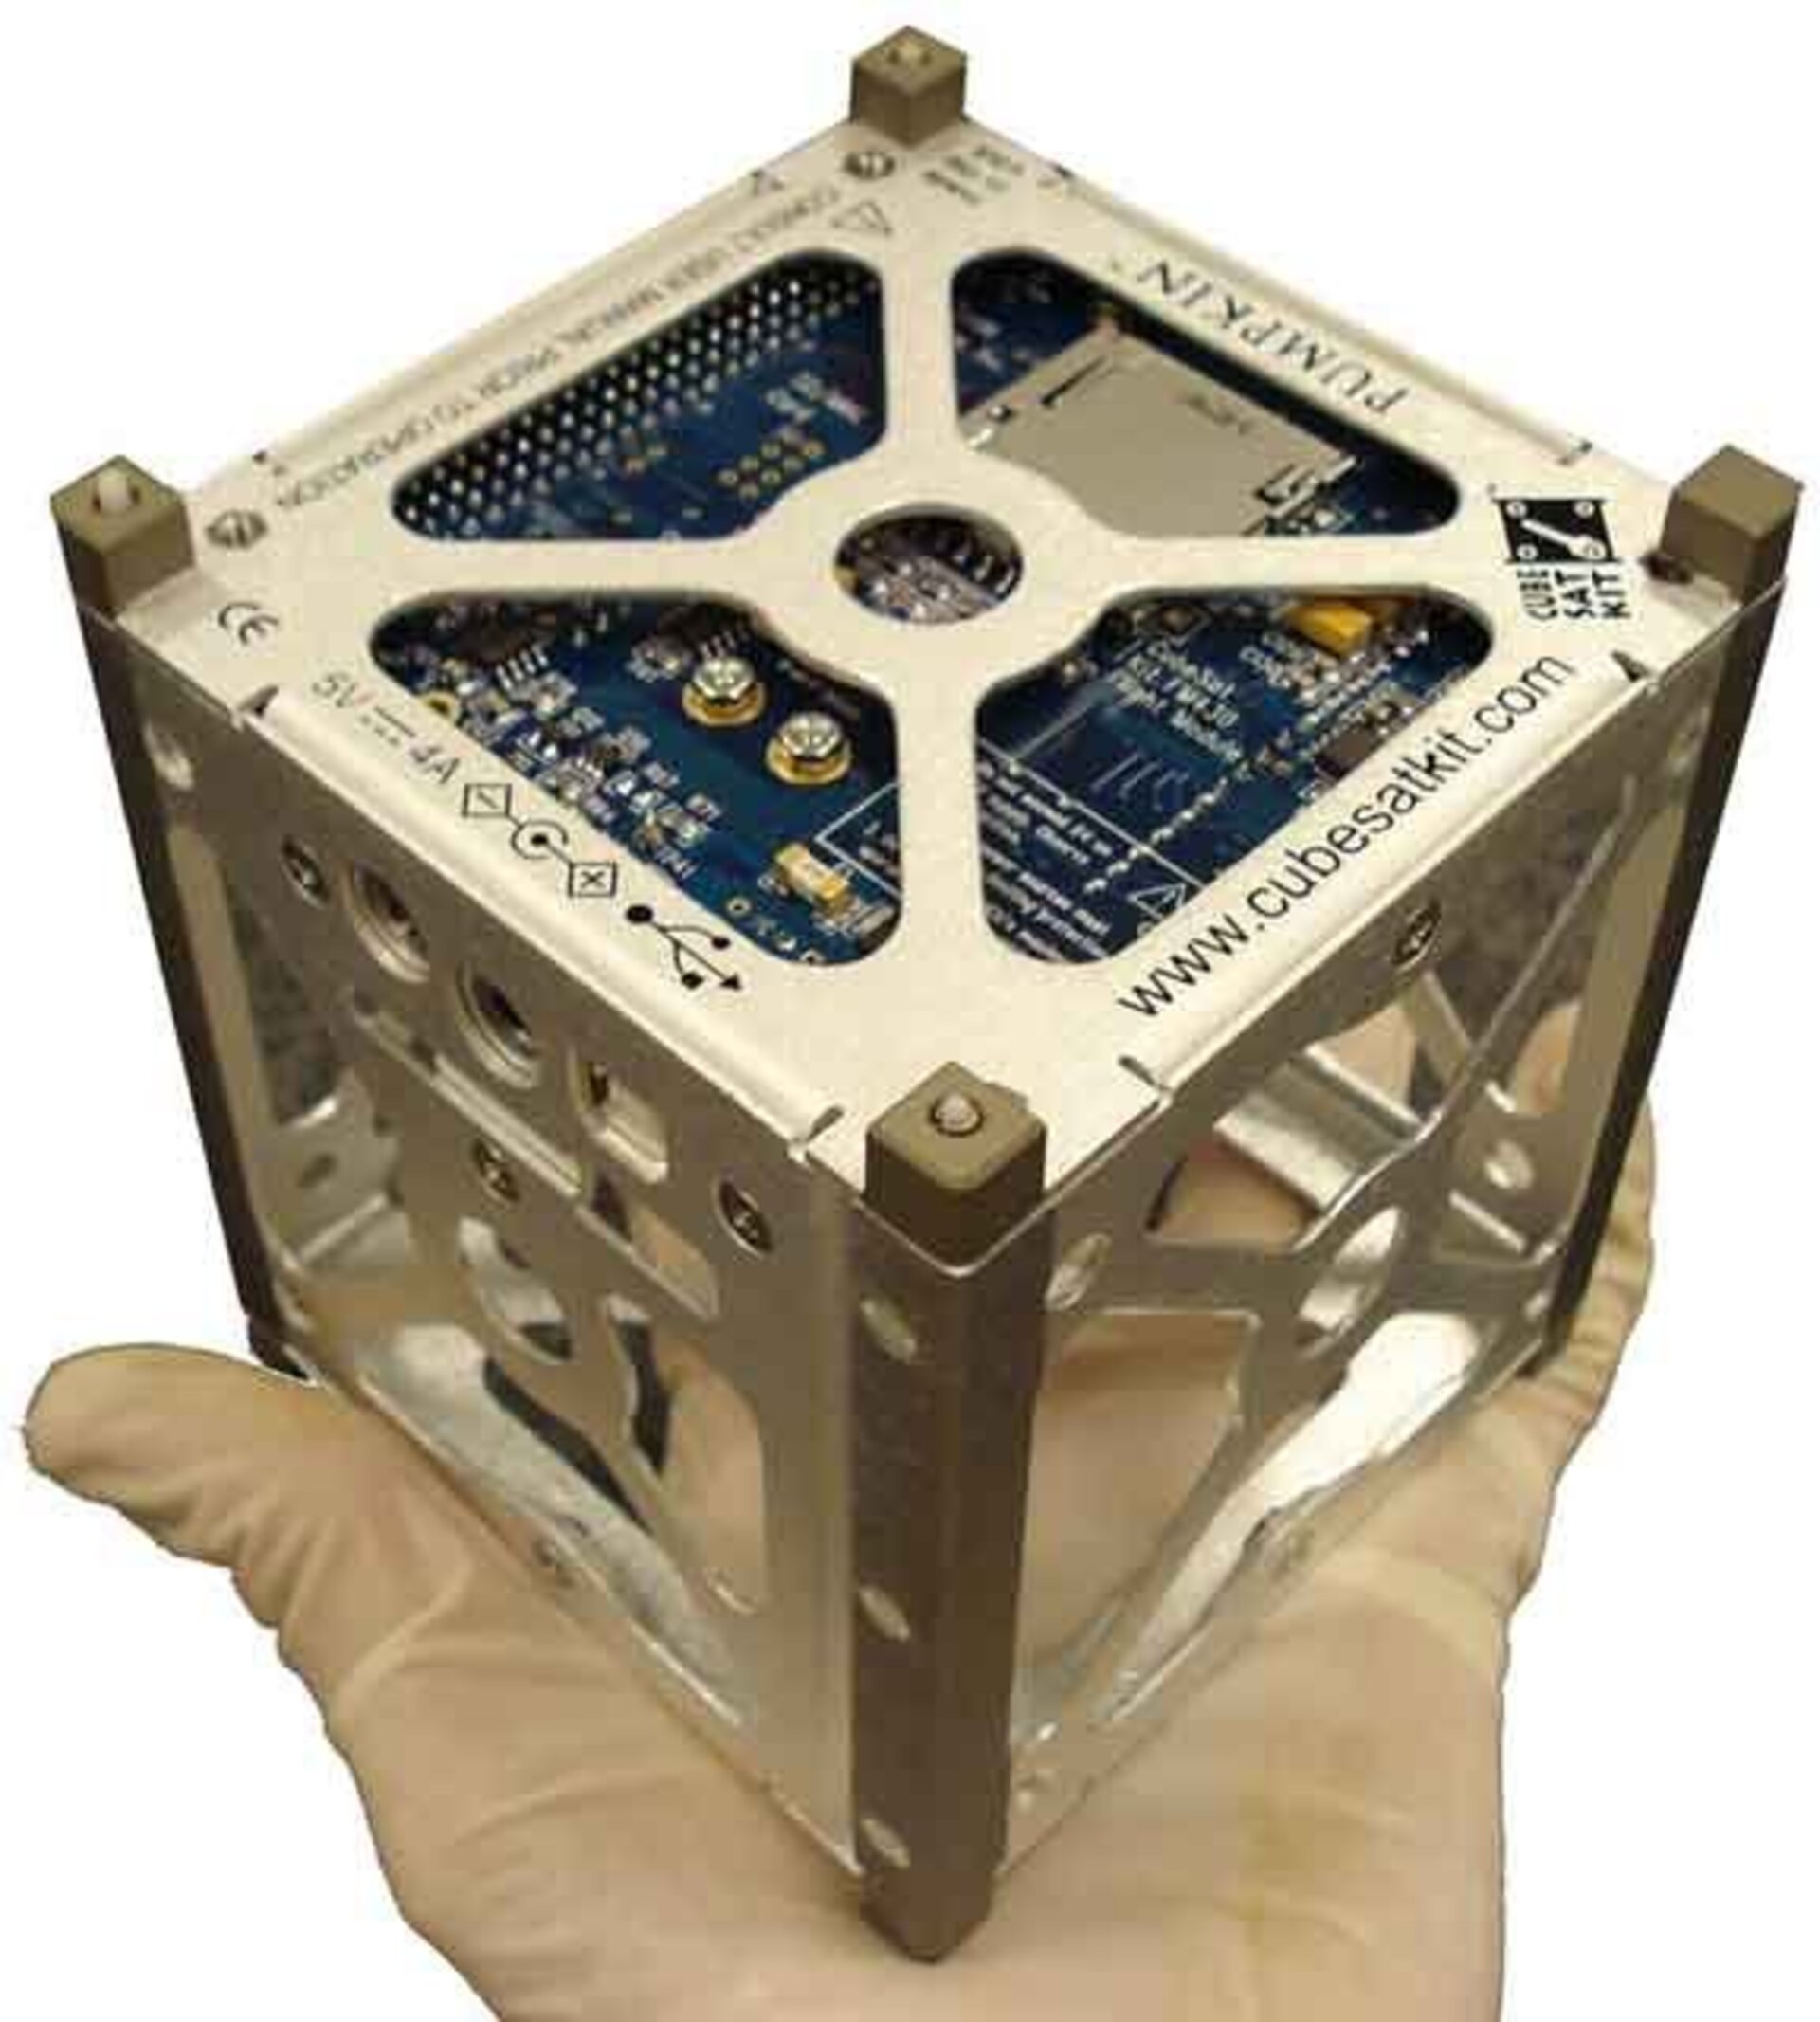 A CubeSats fits in your hand